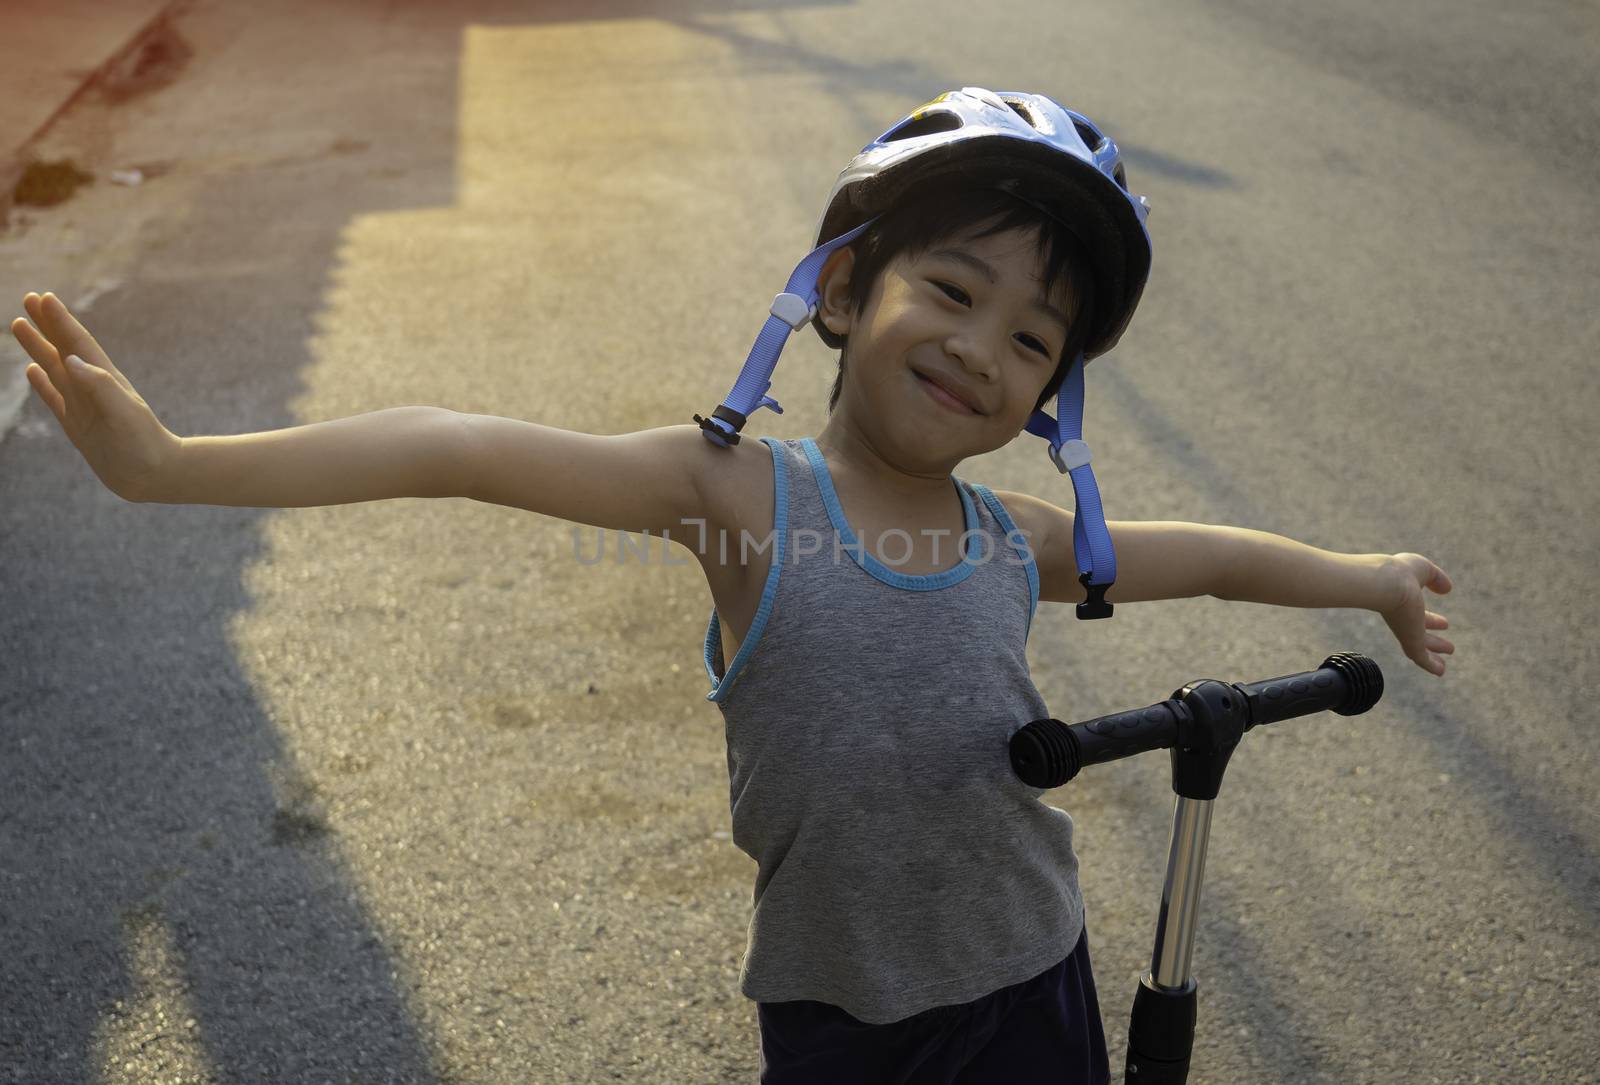 A 4-year-old Asian boy smiled happily with the opportunity to exercise by riding a scooter in the evening during the coronavirus crisis.